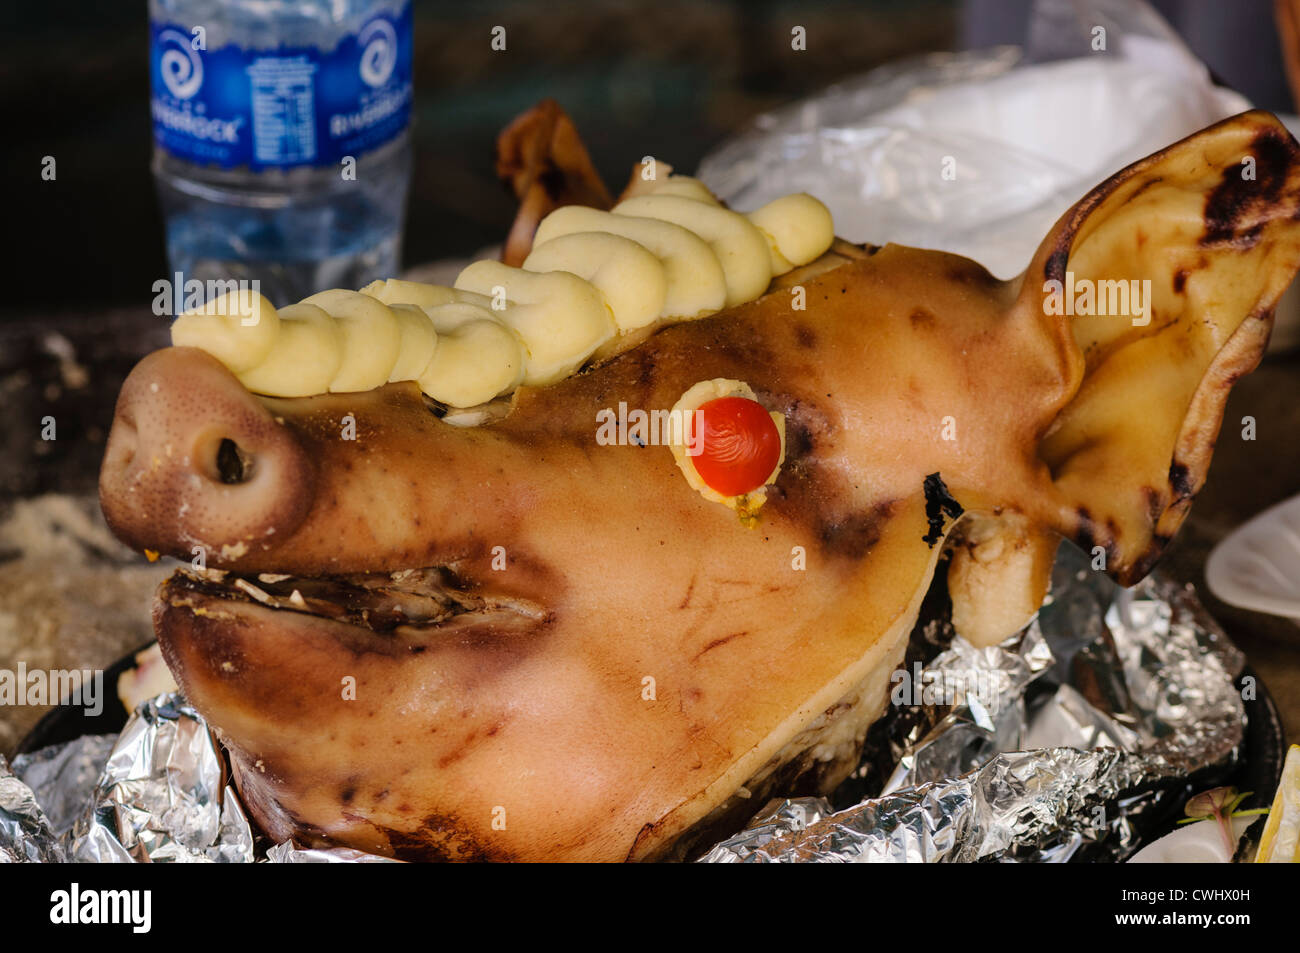 A roast pig's head with piped mashed potato Stock Photo